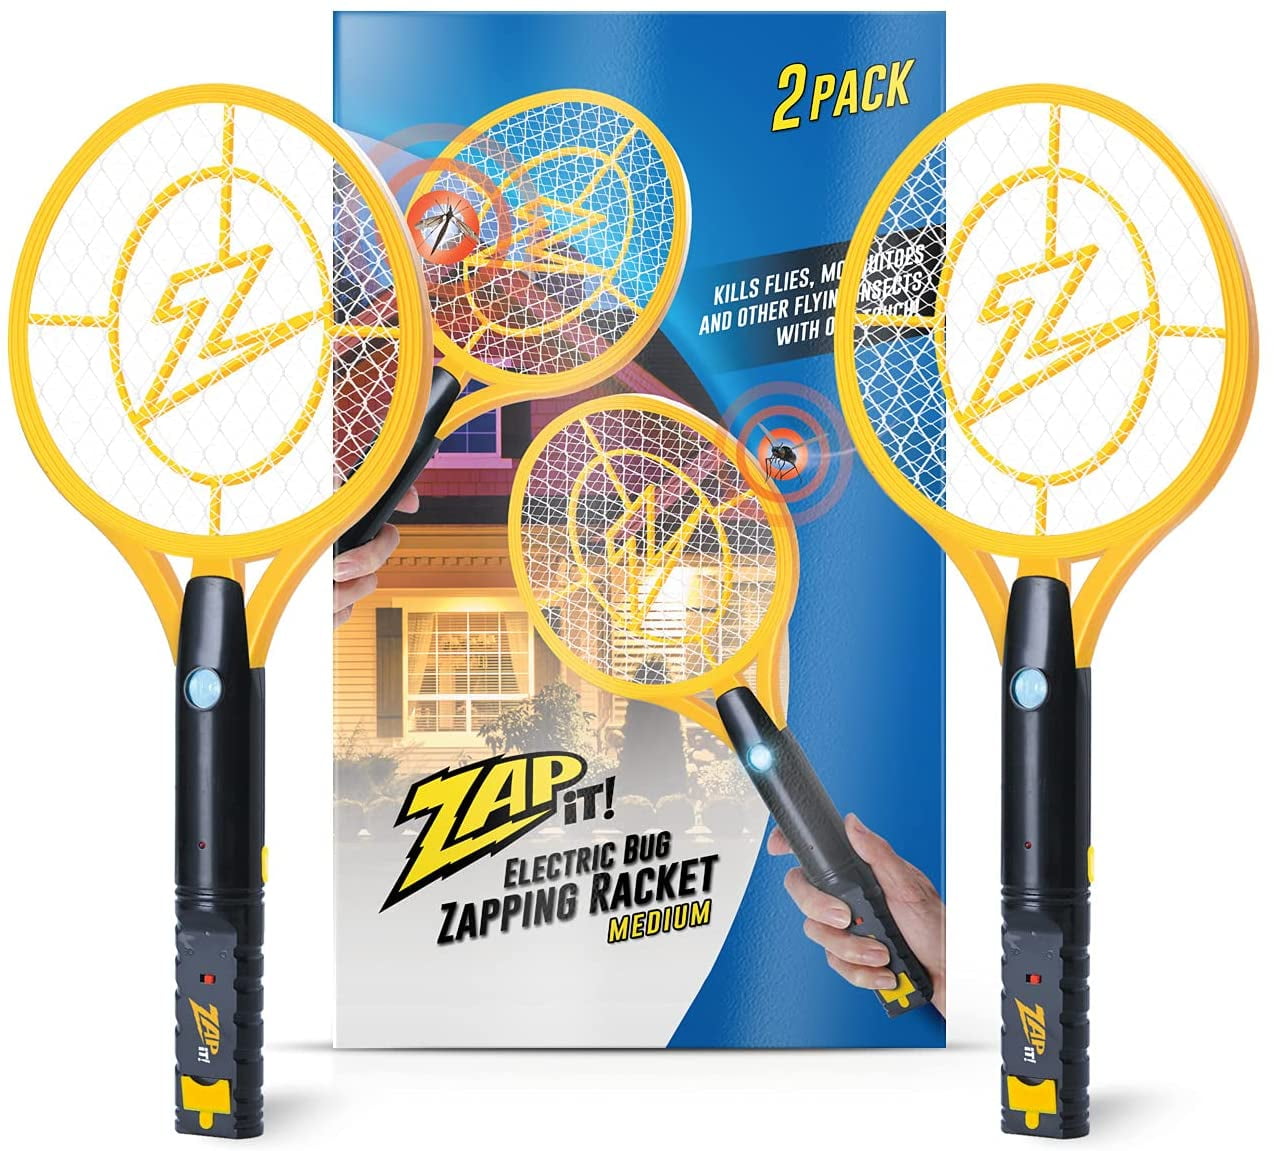 Yellow Bug Zapper,Rechargeable Electric Mosquito Swatter with LED Light,2 Pack of Insect Killers,Household Rechargeable Mosquito Racket,Flyswatter For Home/School/Outdoor